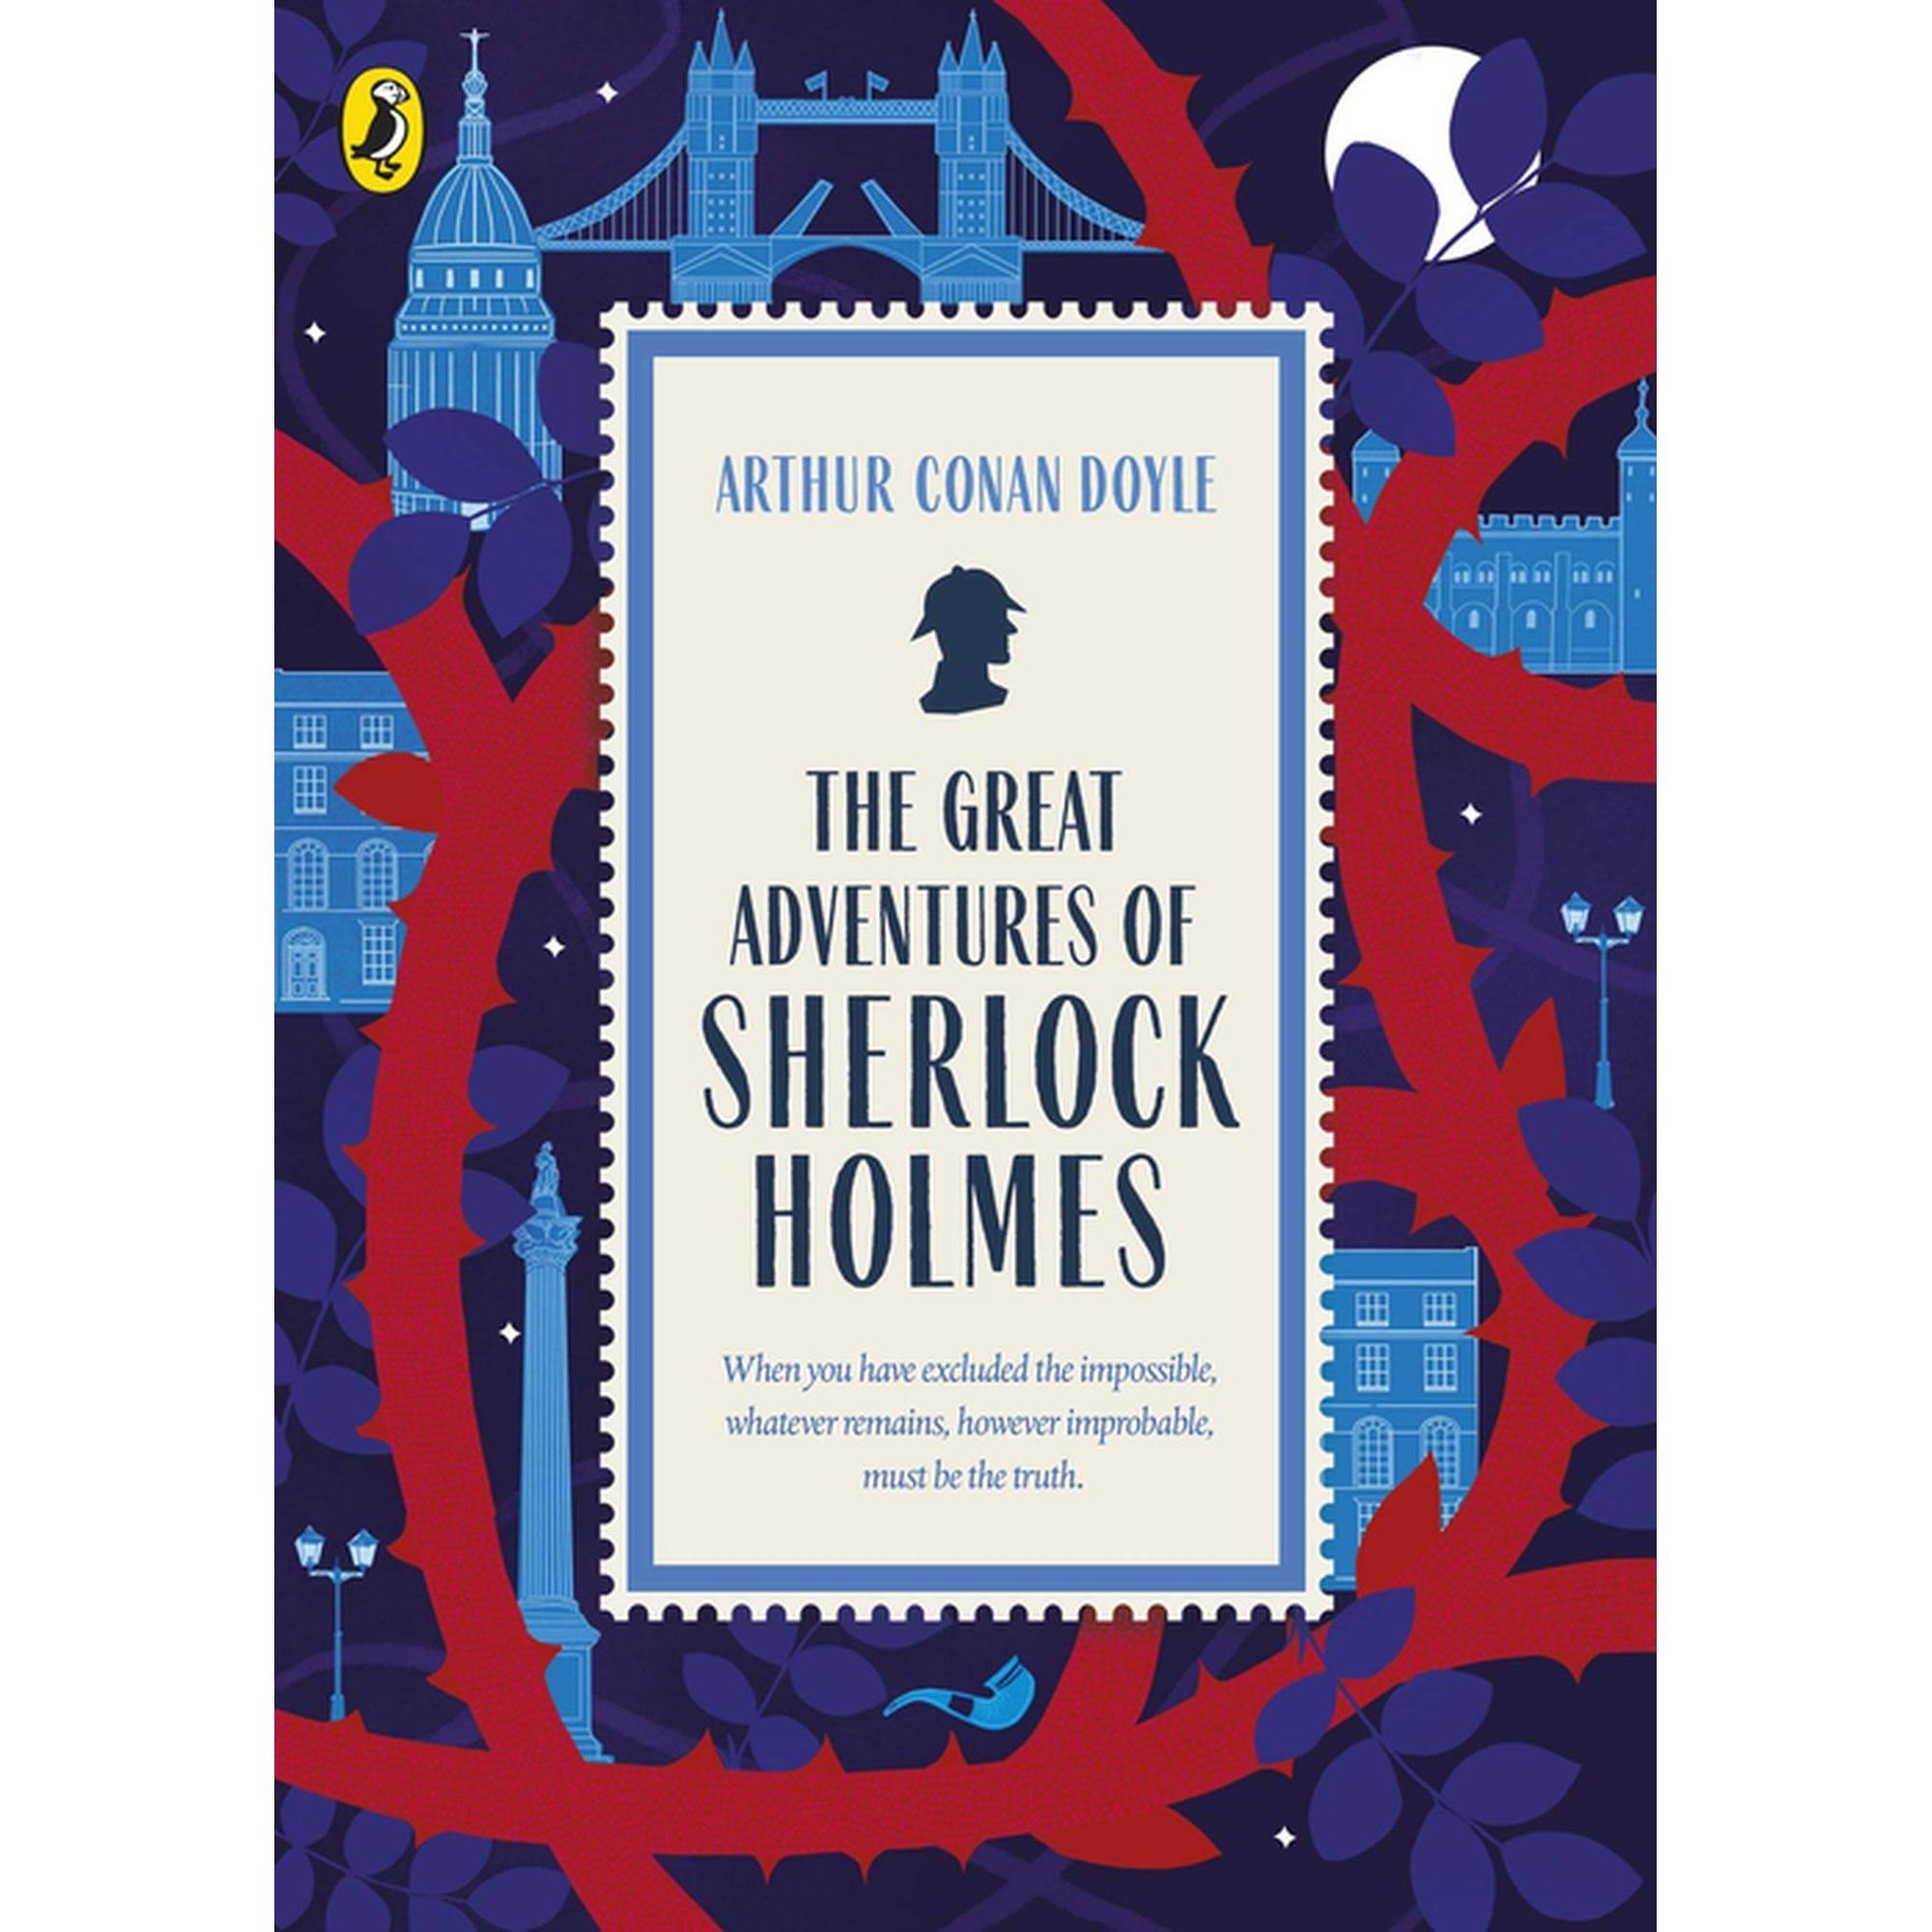 The Great Adventures of Sherlock Holmes [Book]